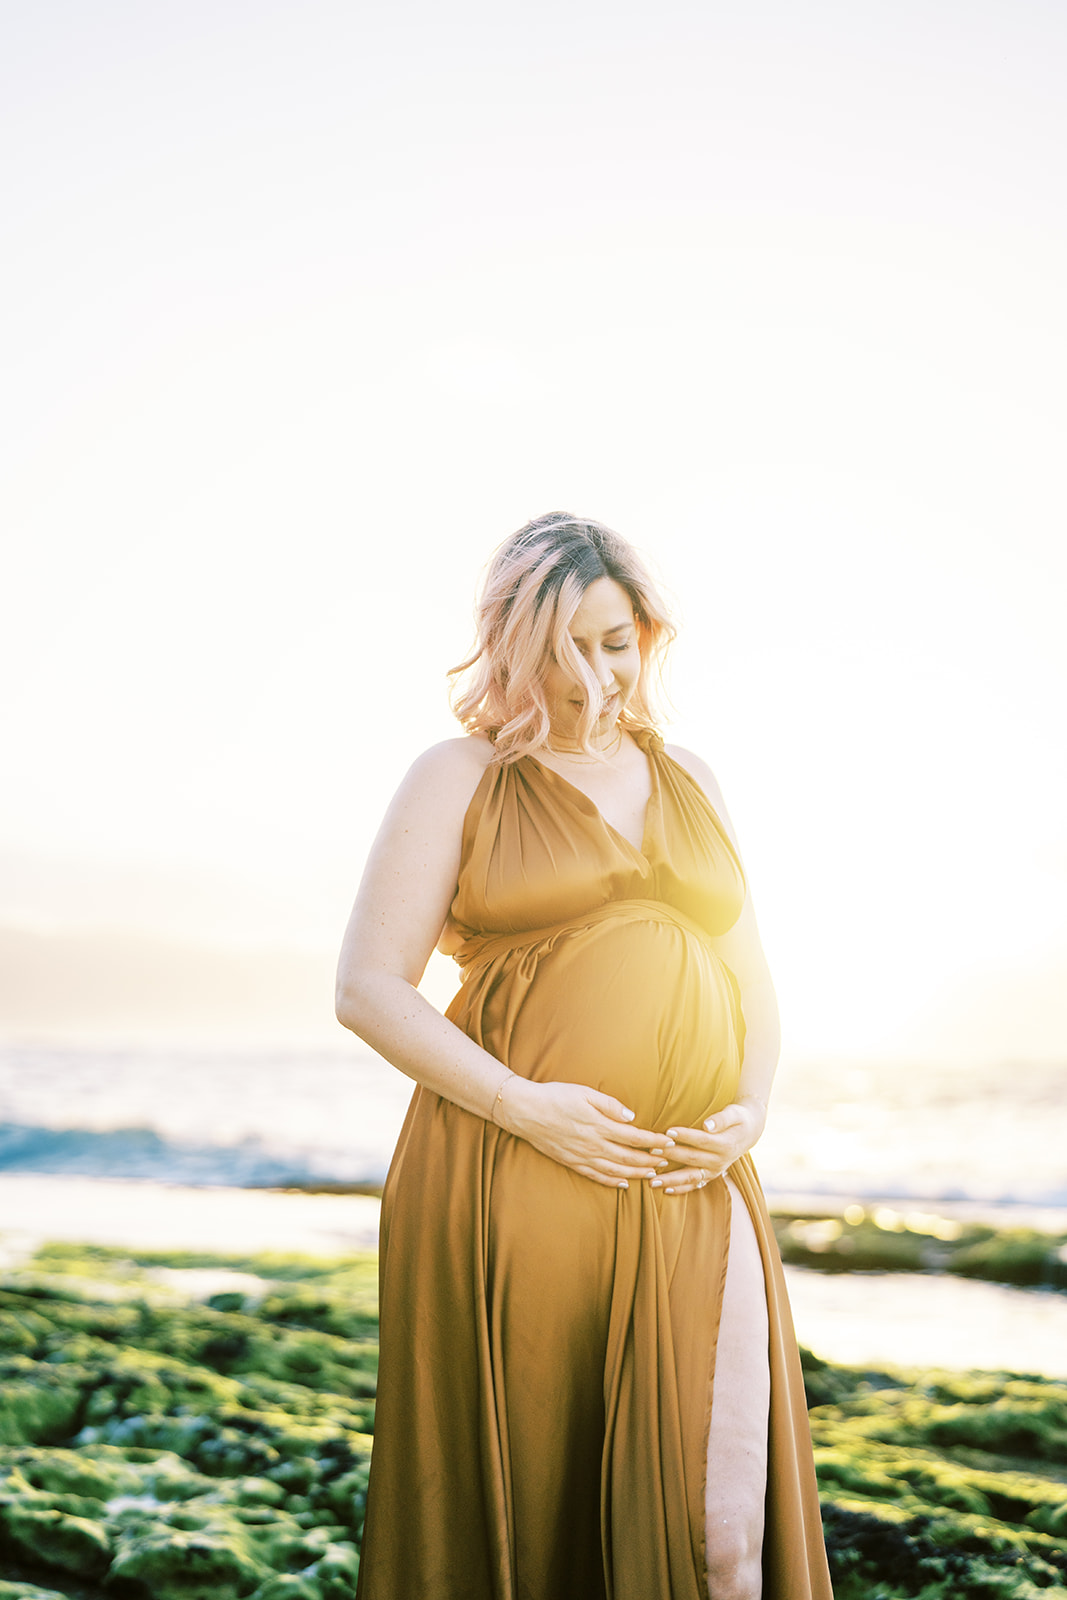 Pregnant woman in a yellow dress holding her baby bump and looking down during sunset Maternity Session on Oahu